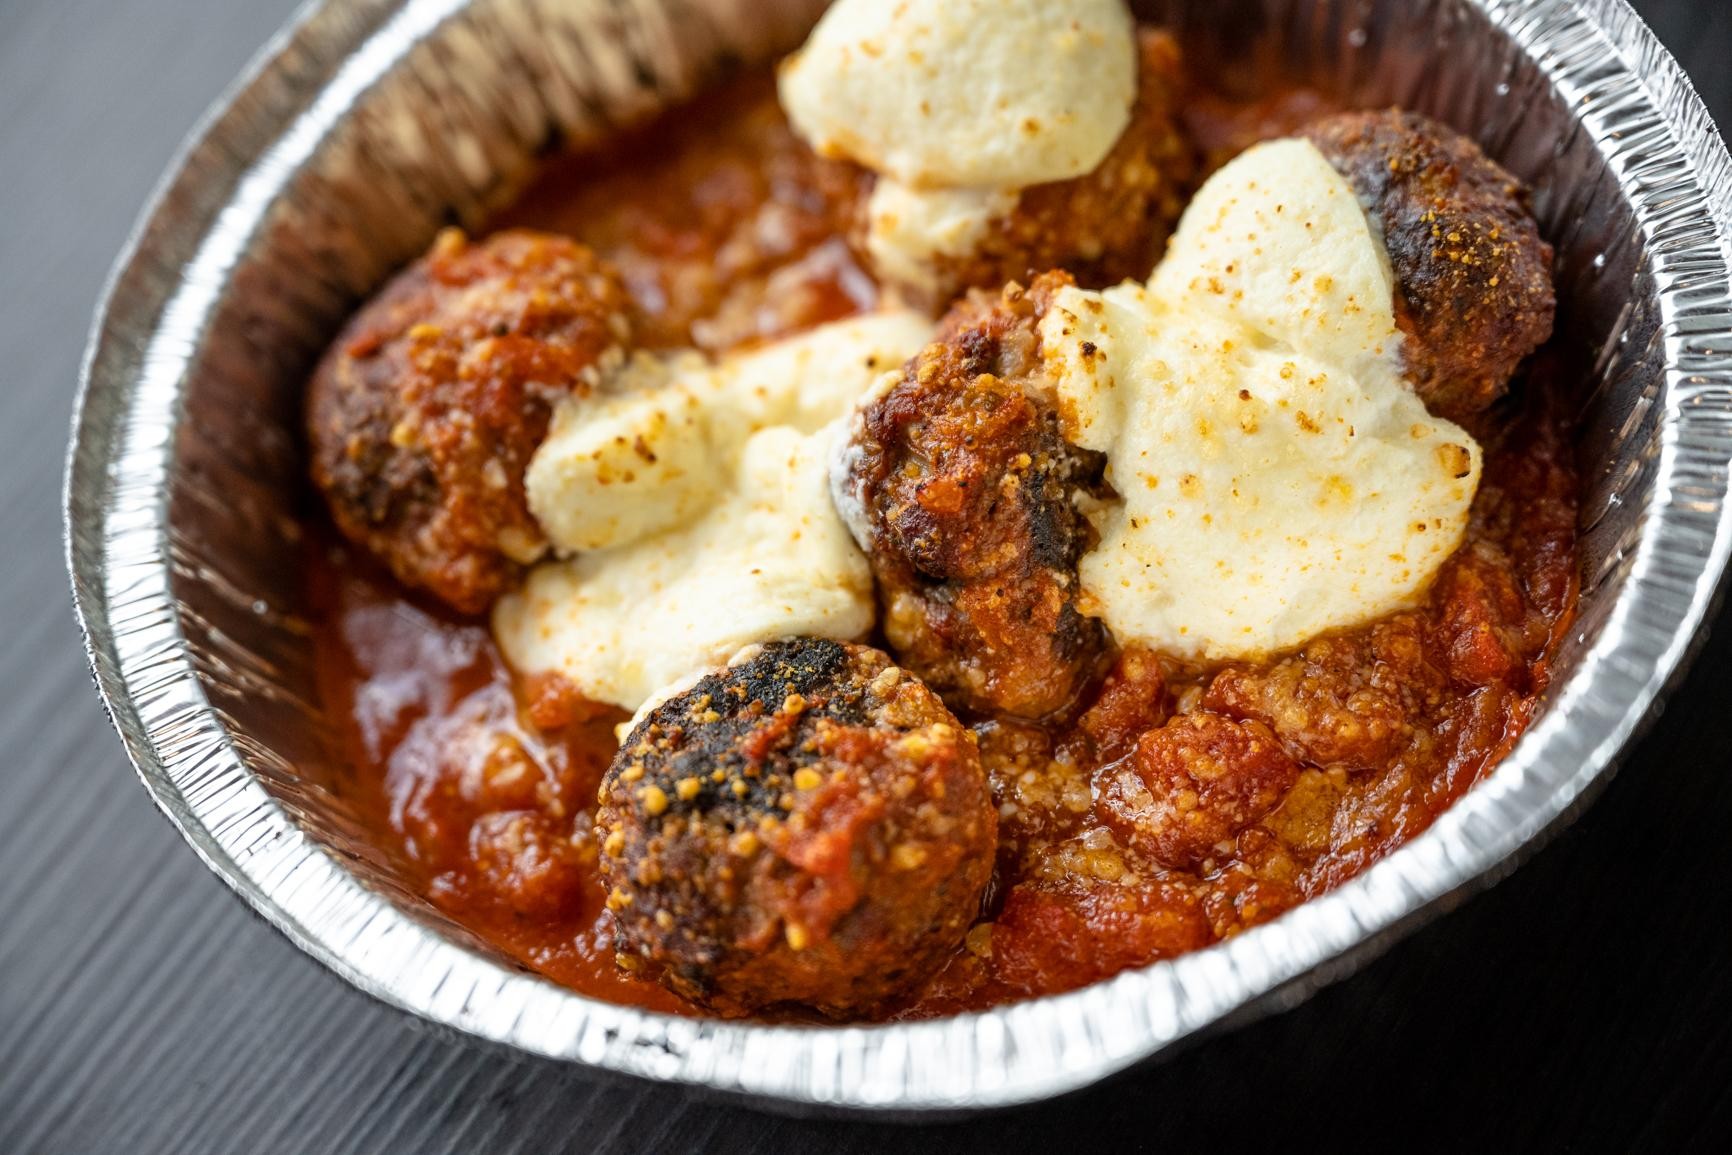 Home Made Meatballs with Ricotta